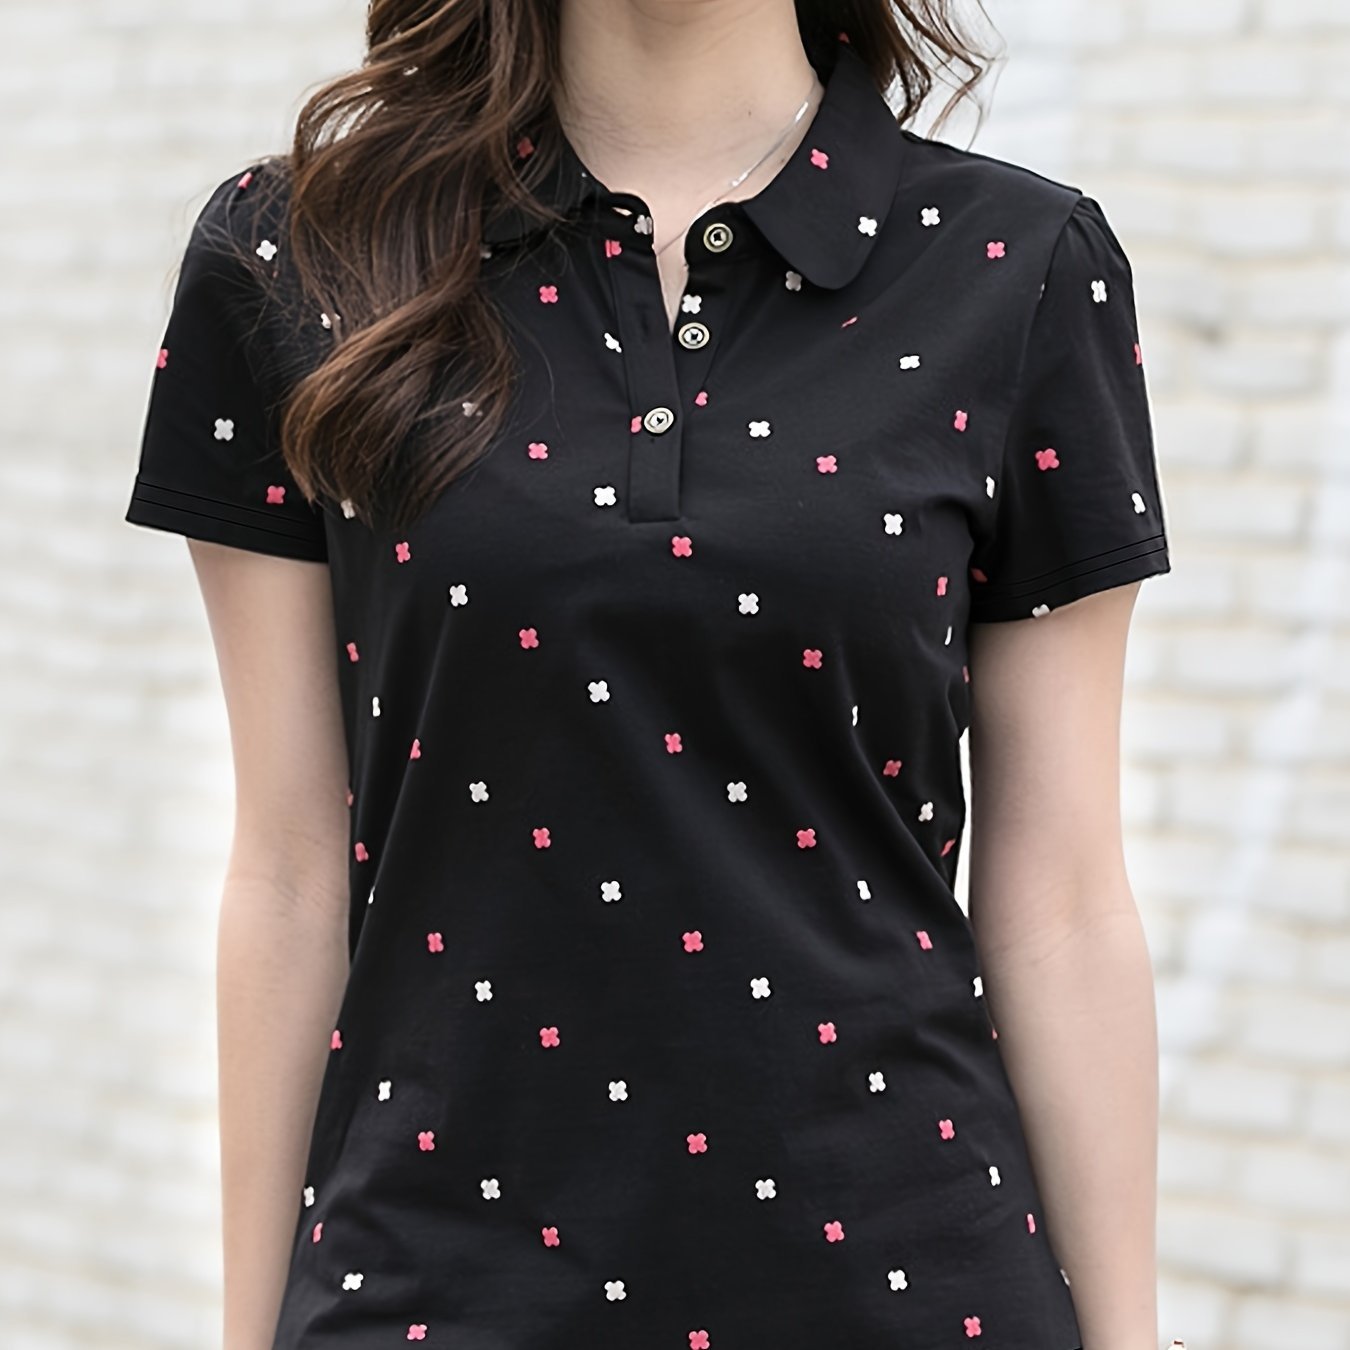 Fashionable Summer Short Sleeve Polo - All Over Print, Casual & Comfortable - CasualFlowshop